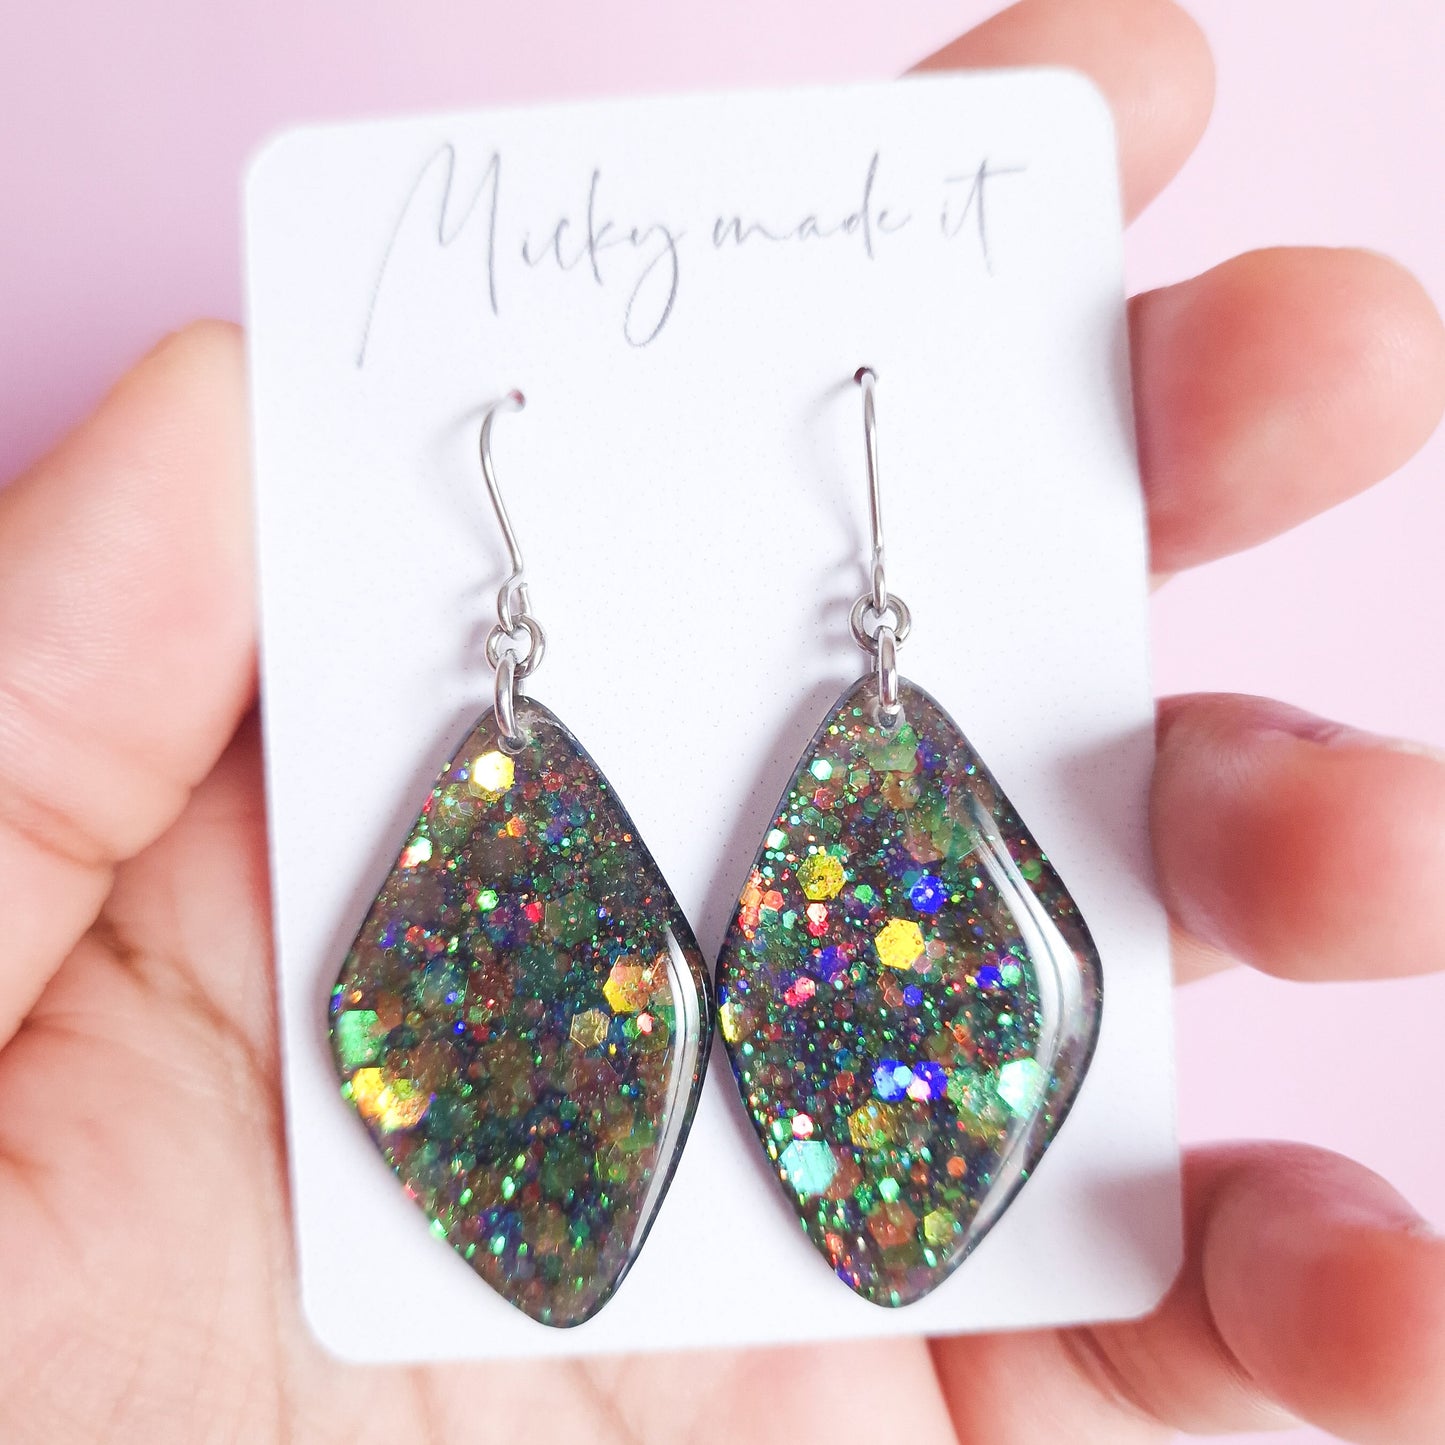 Micky made it Galene (hooked edition) earrings in Salem black glitter mix with iridescent sparkles